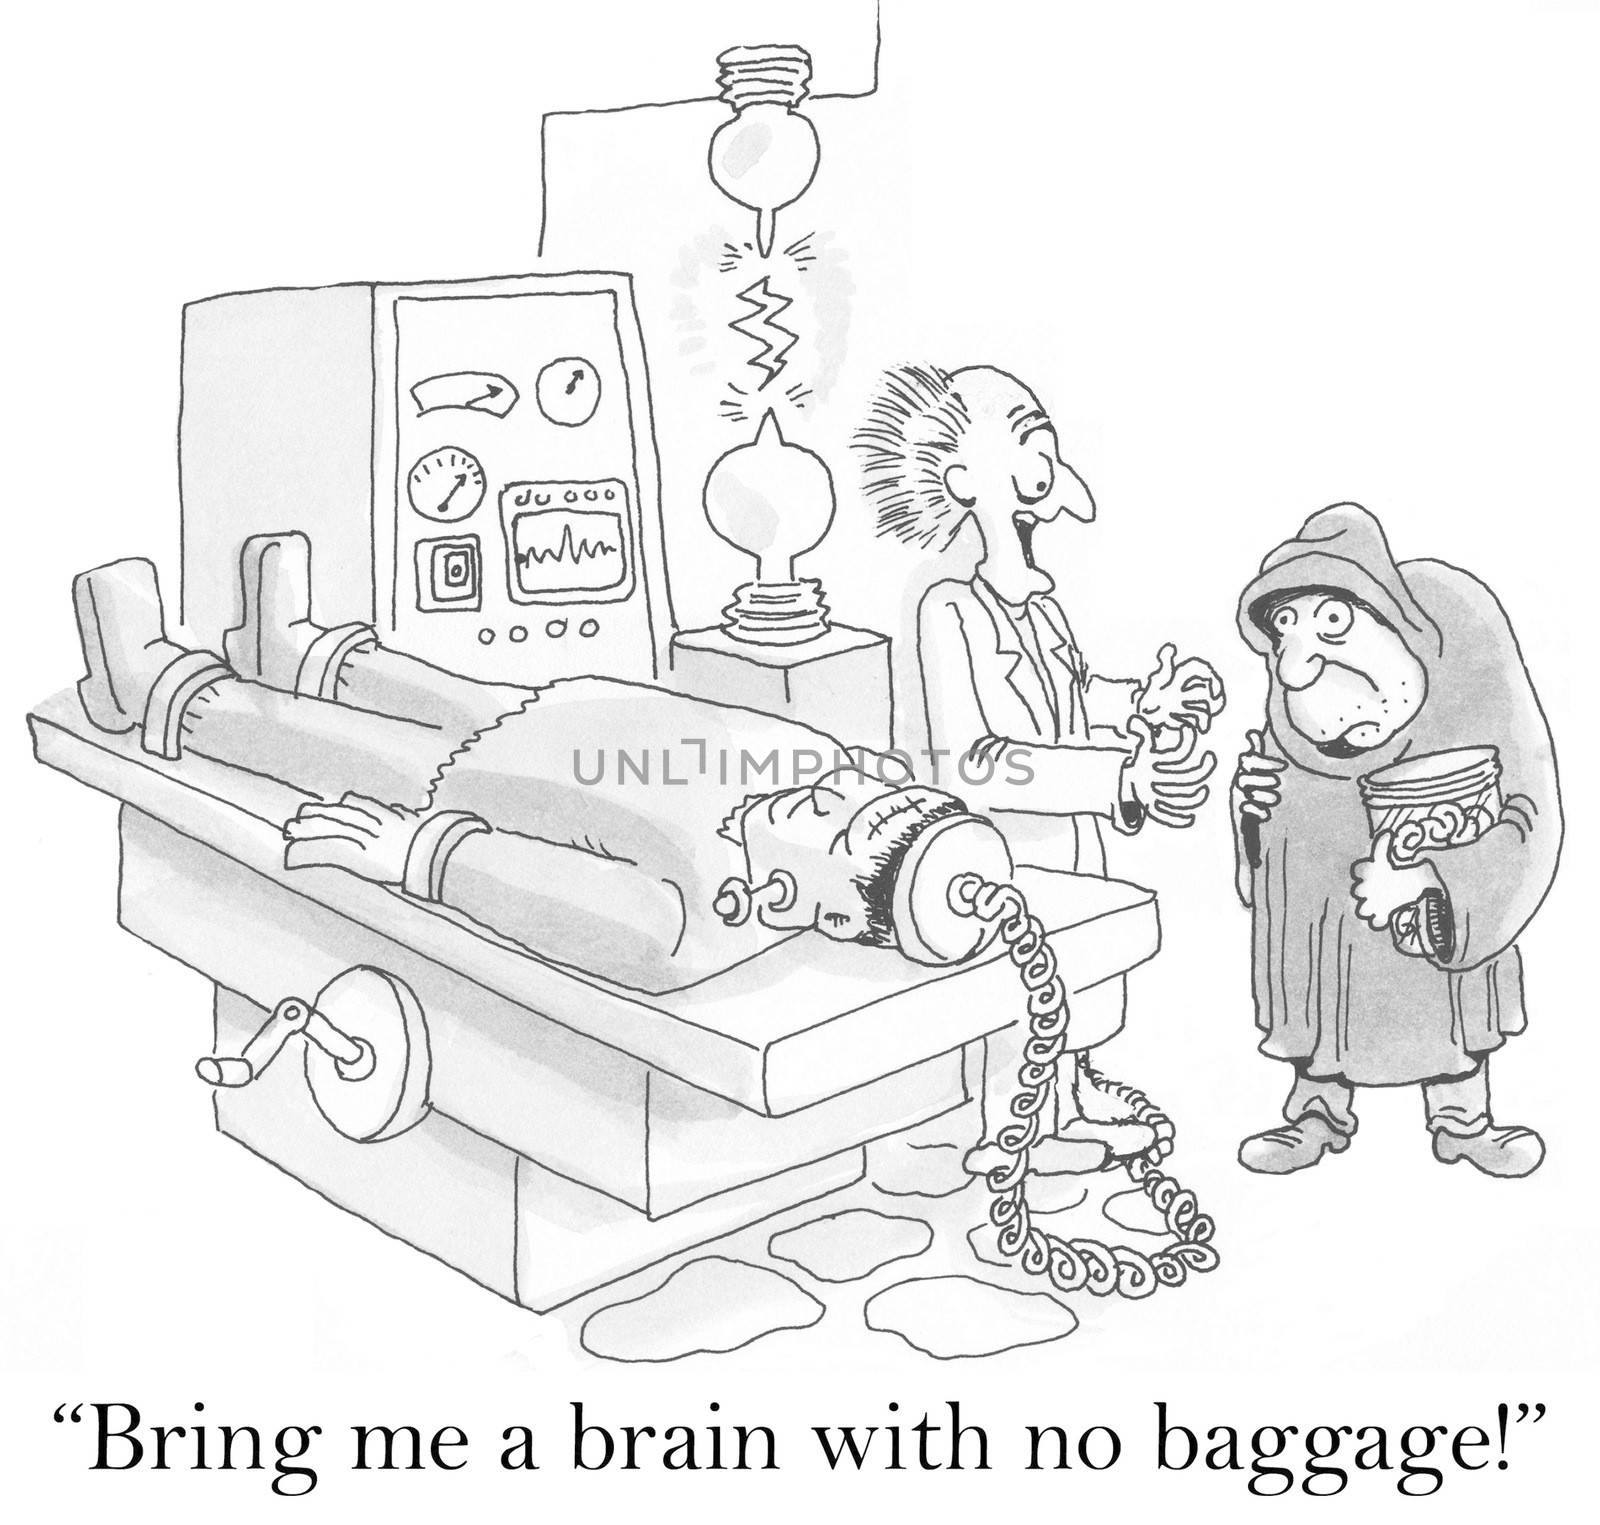 "Bring me a brain with no baggage?"